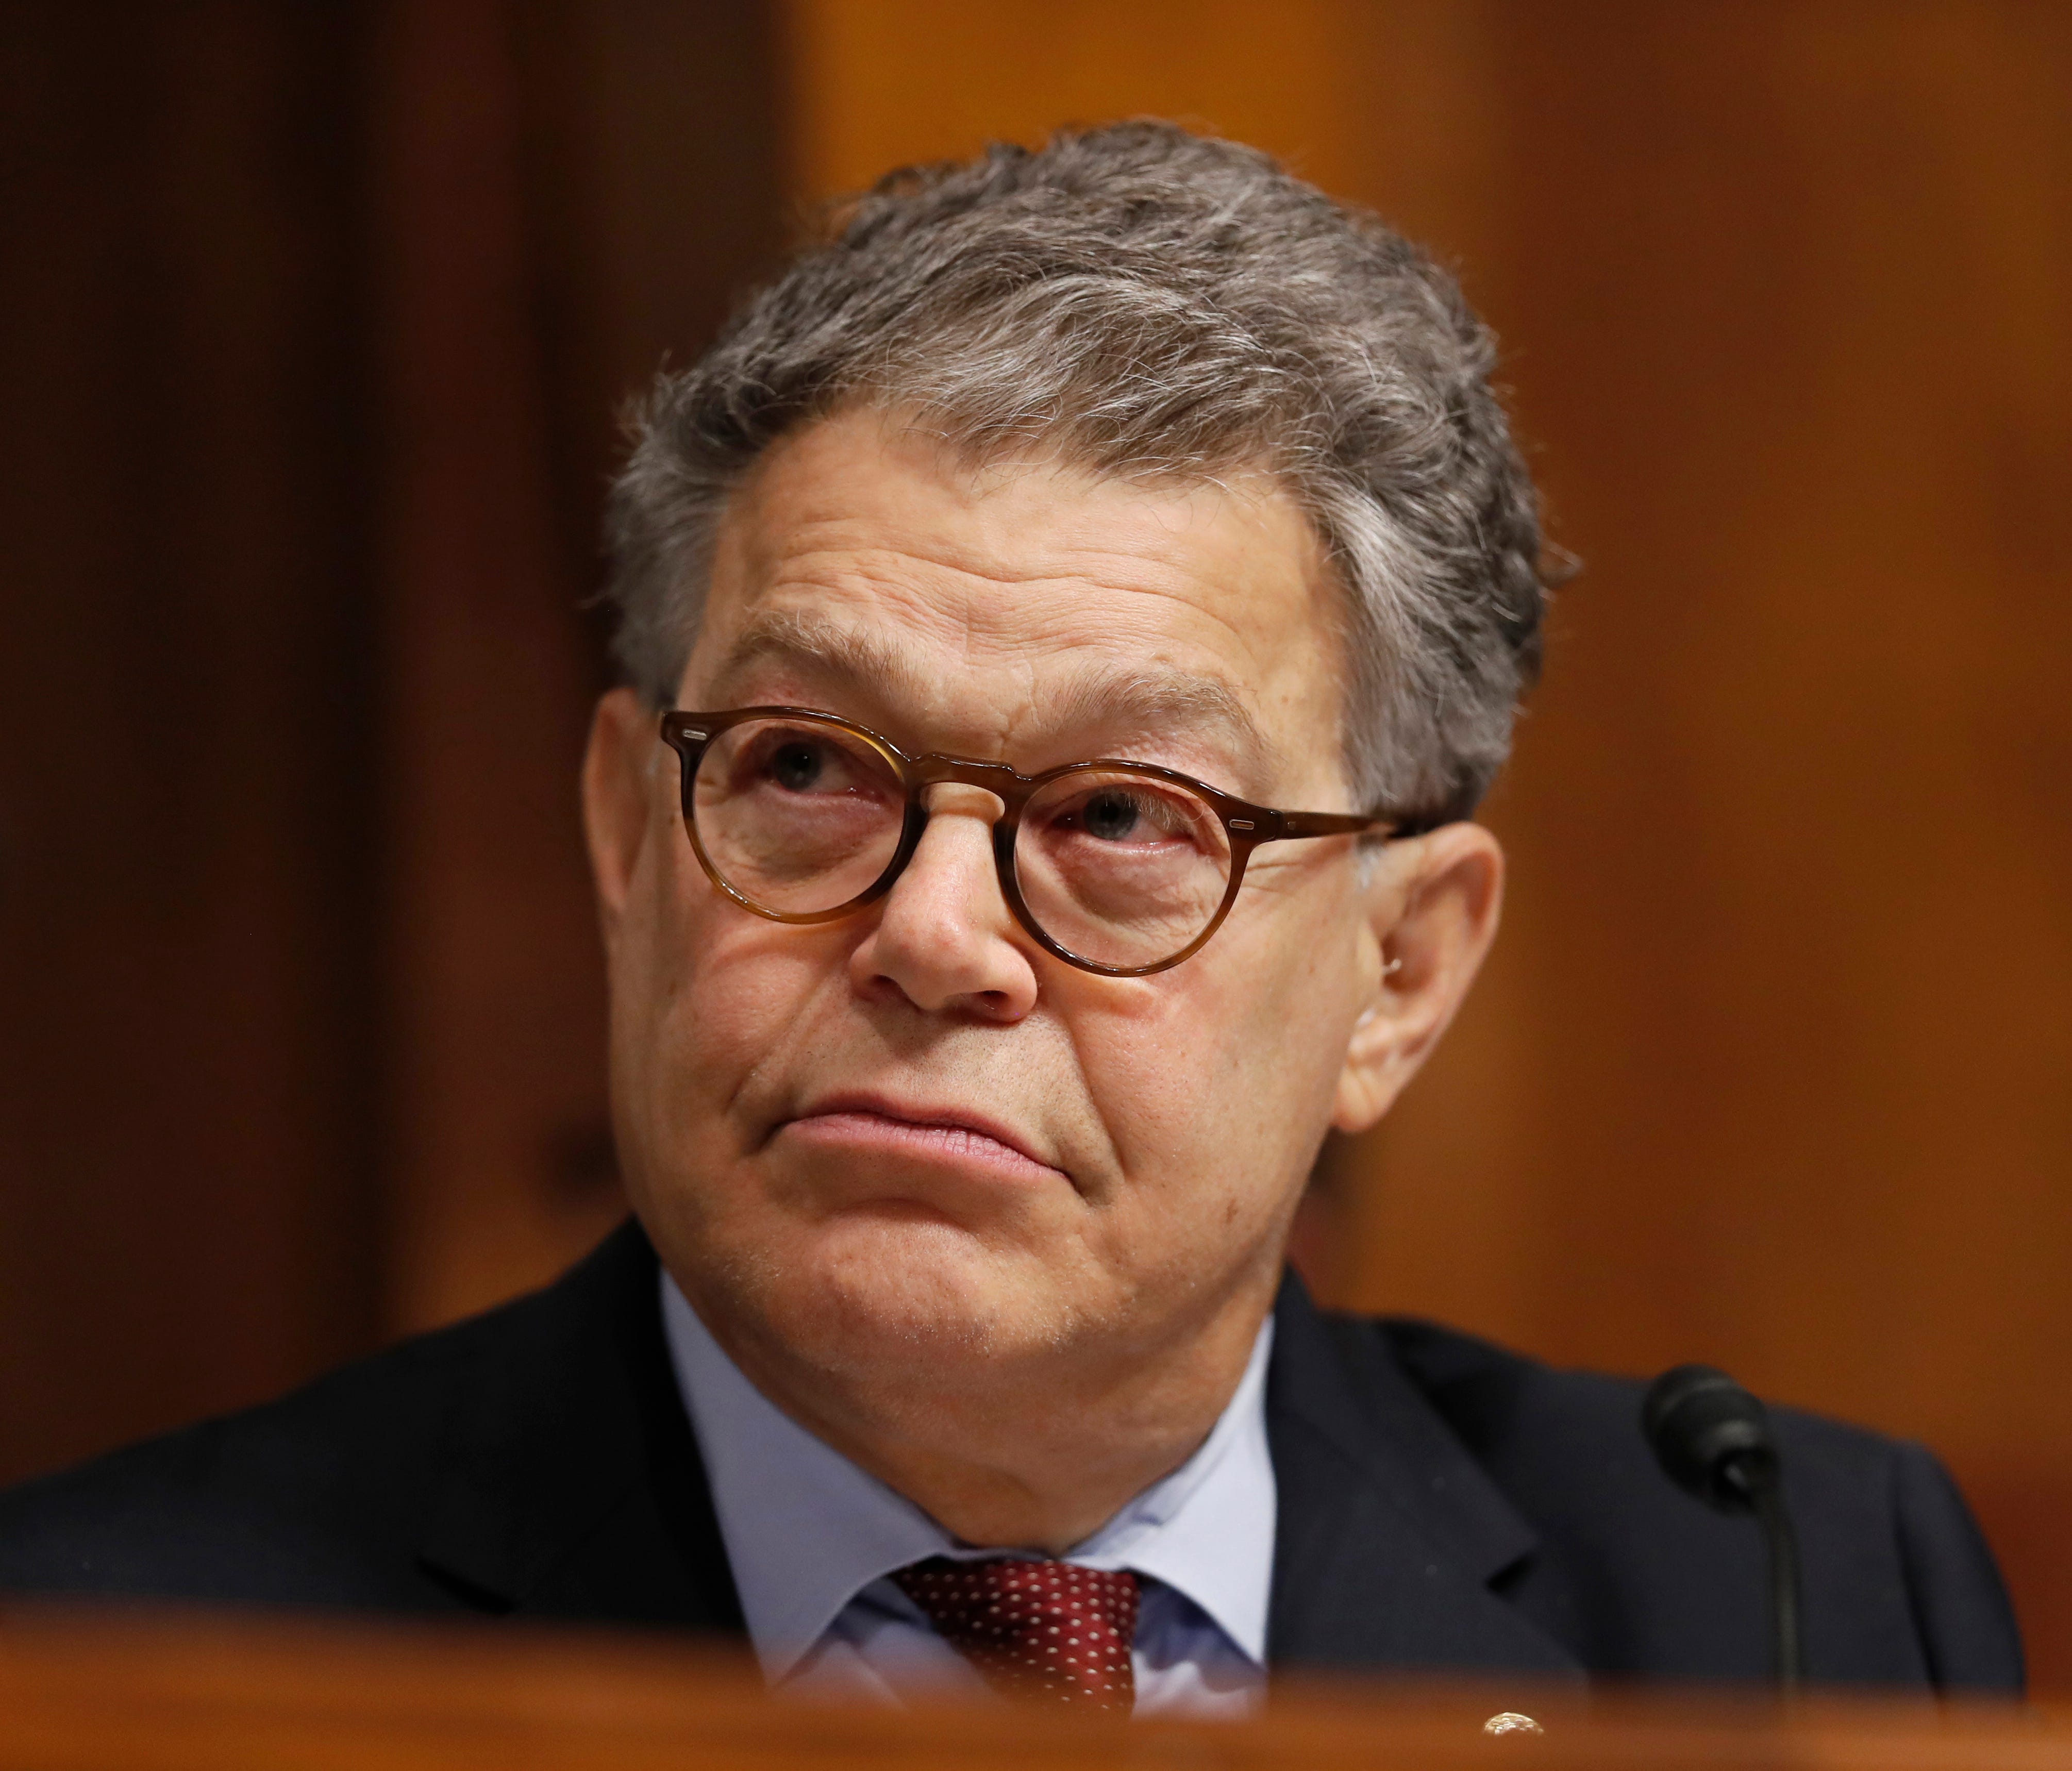 In this Sept. 20, 2017 file photo, Sen. Al Franken, D-Minn., listens during a Senate Judiciary Committee hearing for Colorado Supreme Court Justice Allison Eid, on her nomination to the U.S. Court of Appeals for the 10th Circuit, on Capitol Hill in W